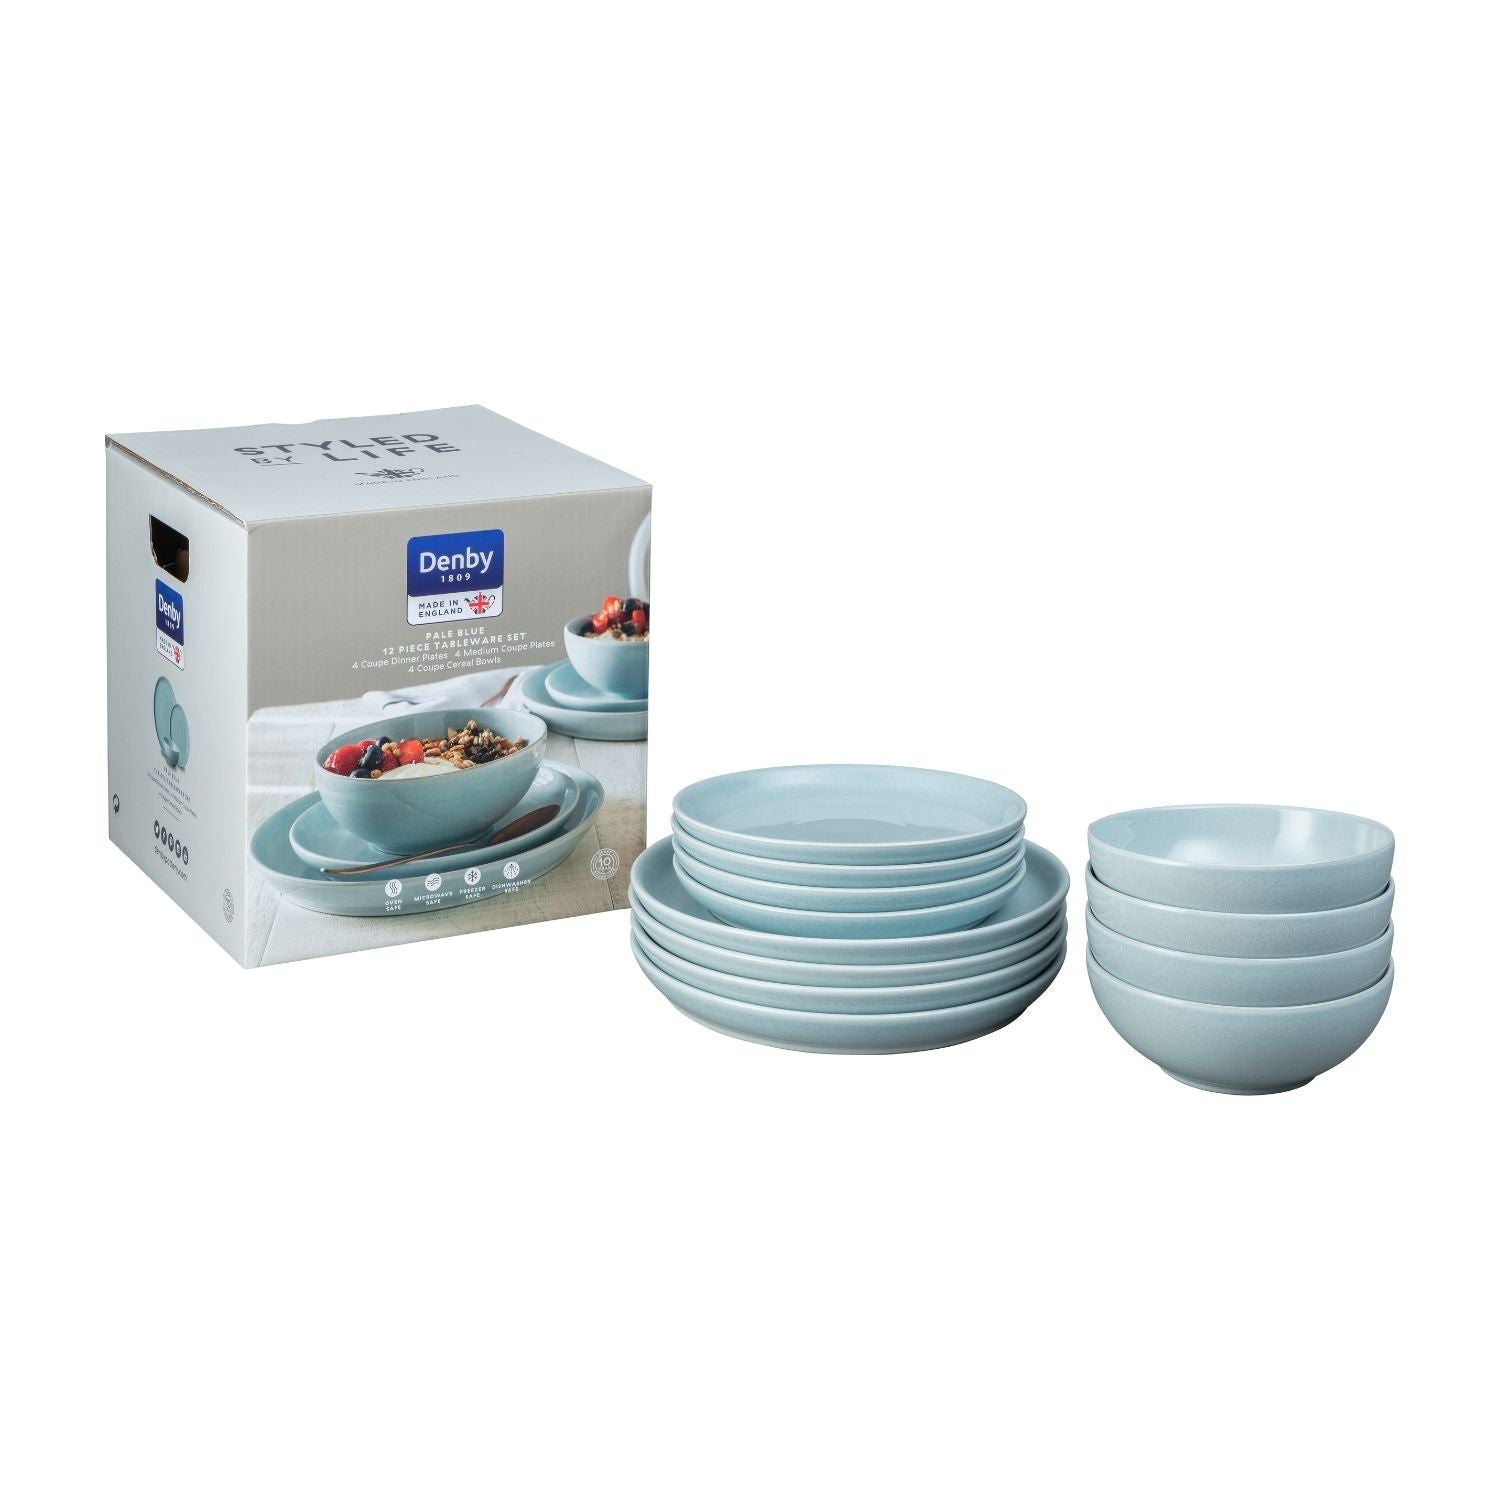 Denby 12 piece Set of Tableware - Pale Blue 1 Shaws Department Stores